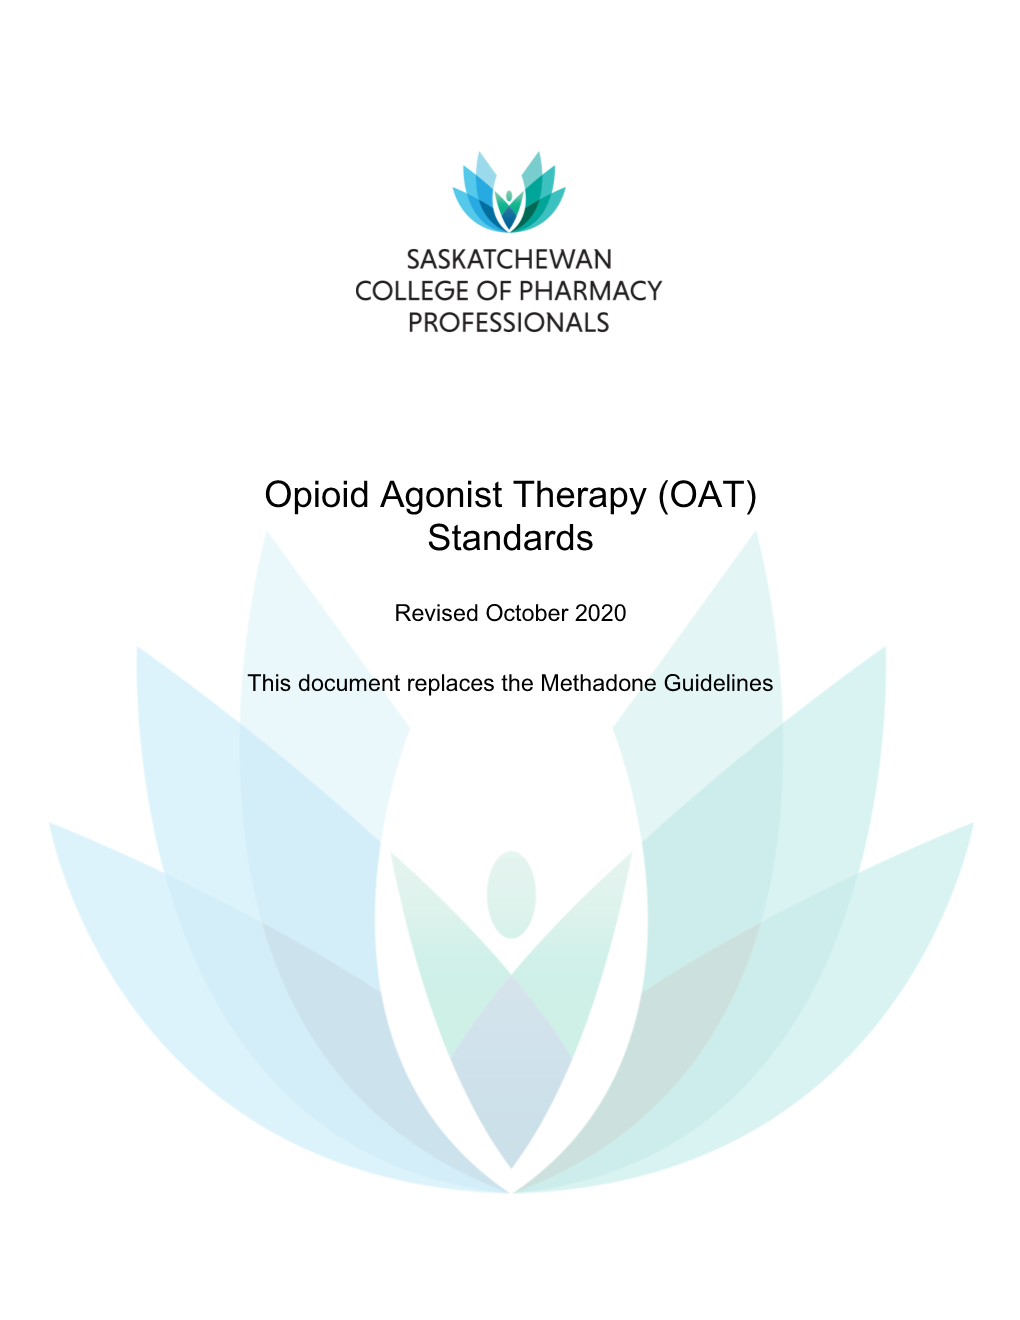 Opioid Agonist Therapy (OAT) Standards